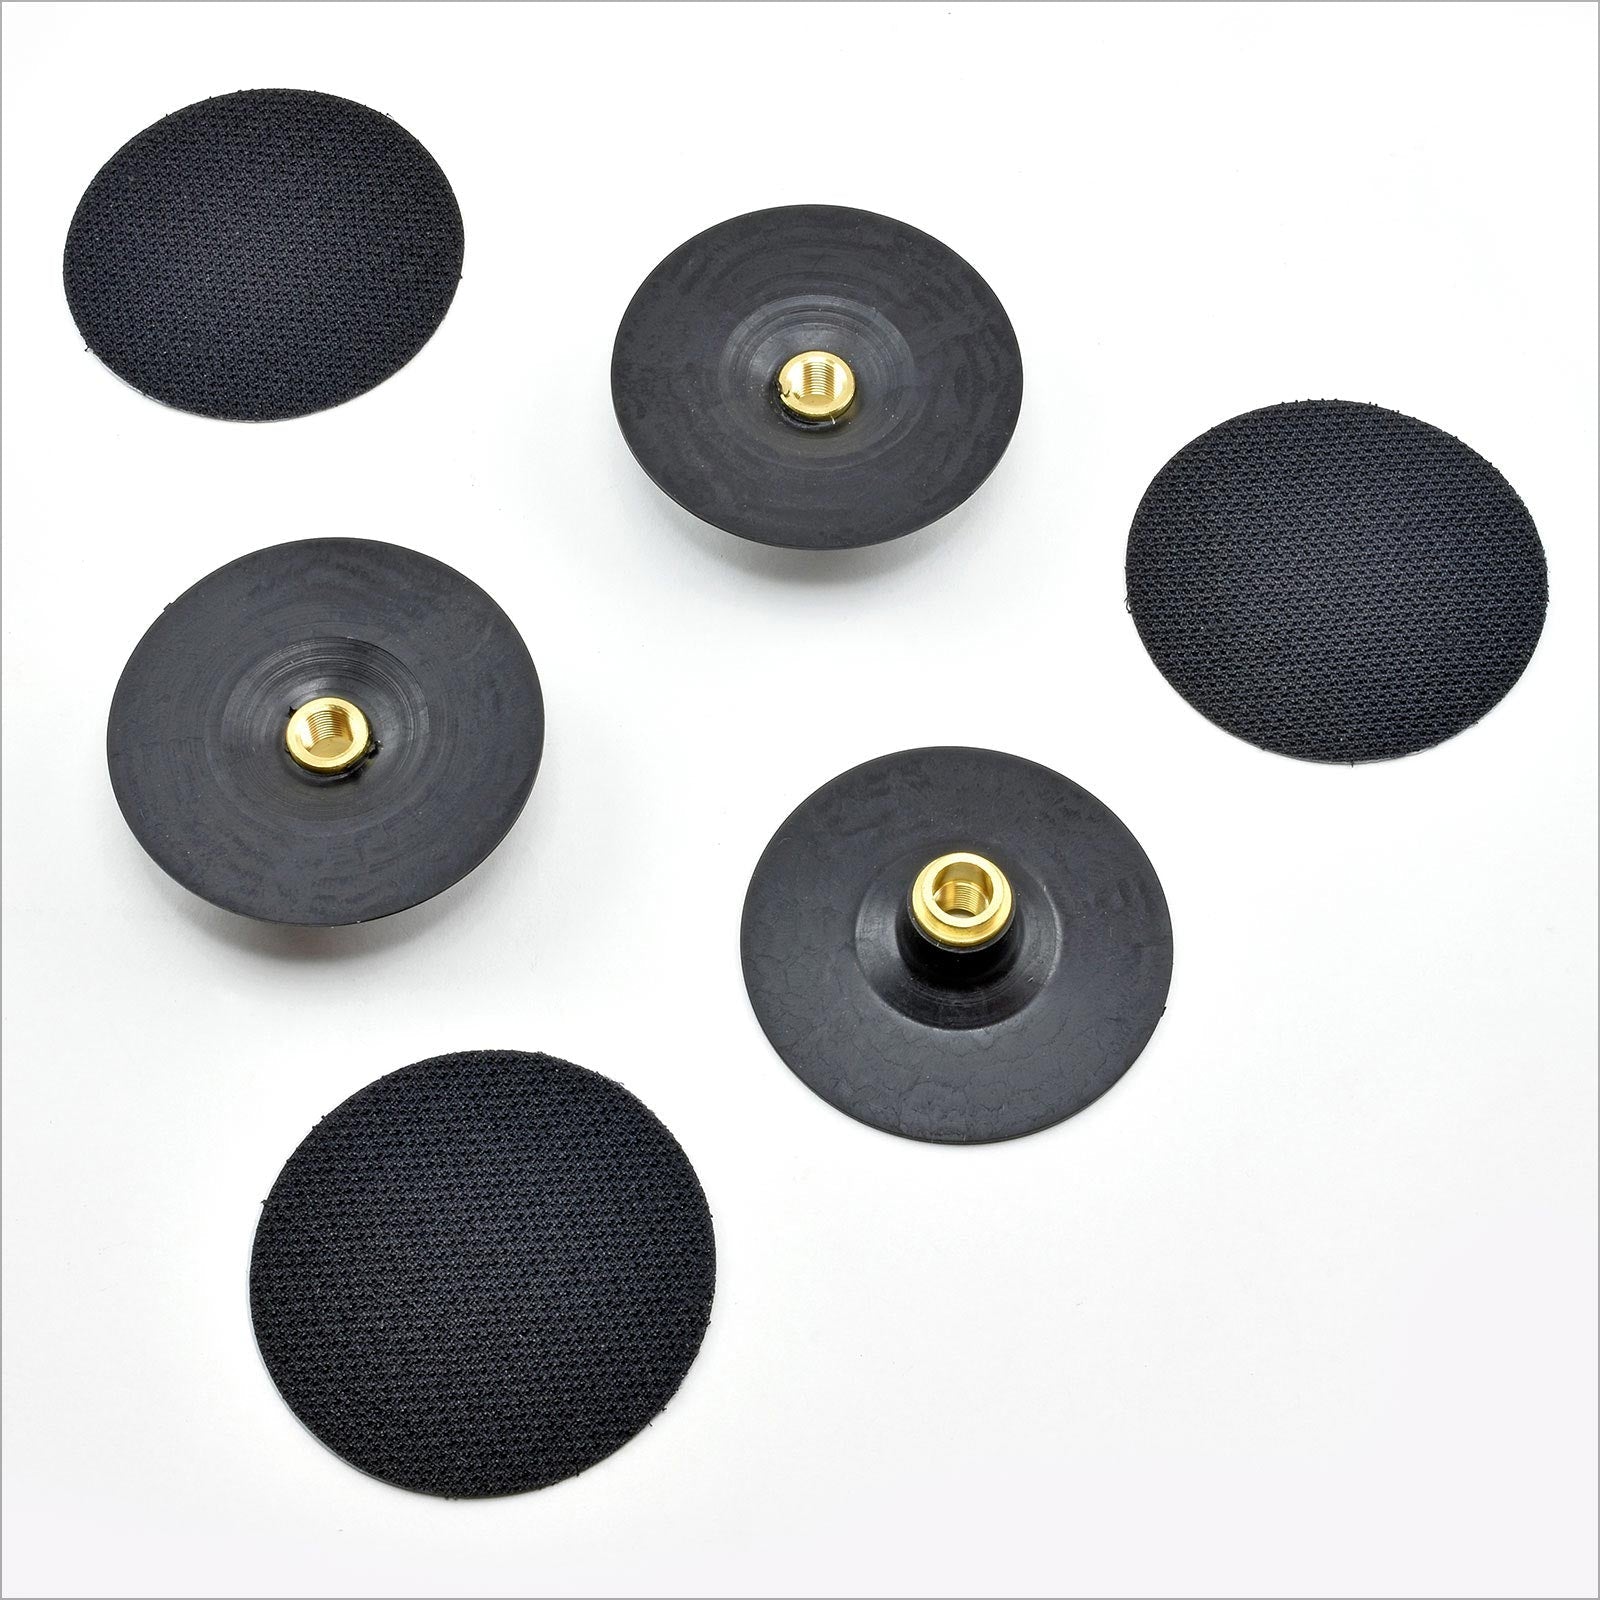 Flexible Disk Mounting Wheels, 2 - 3/8 Inch Dia. (Set of 3) - Micro - Mark Tool Accessories